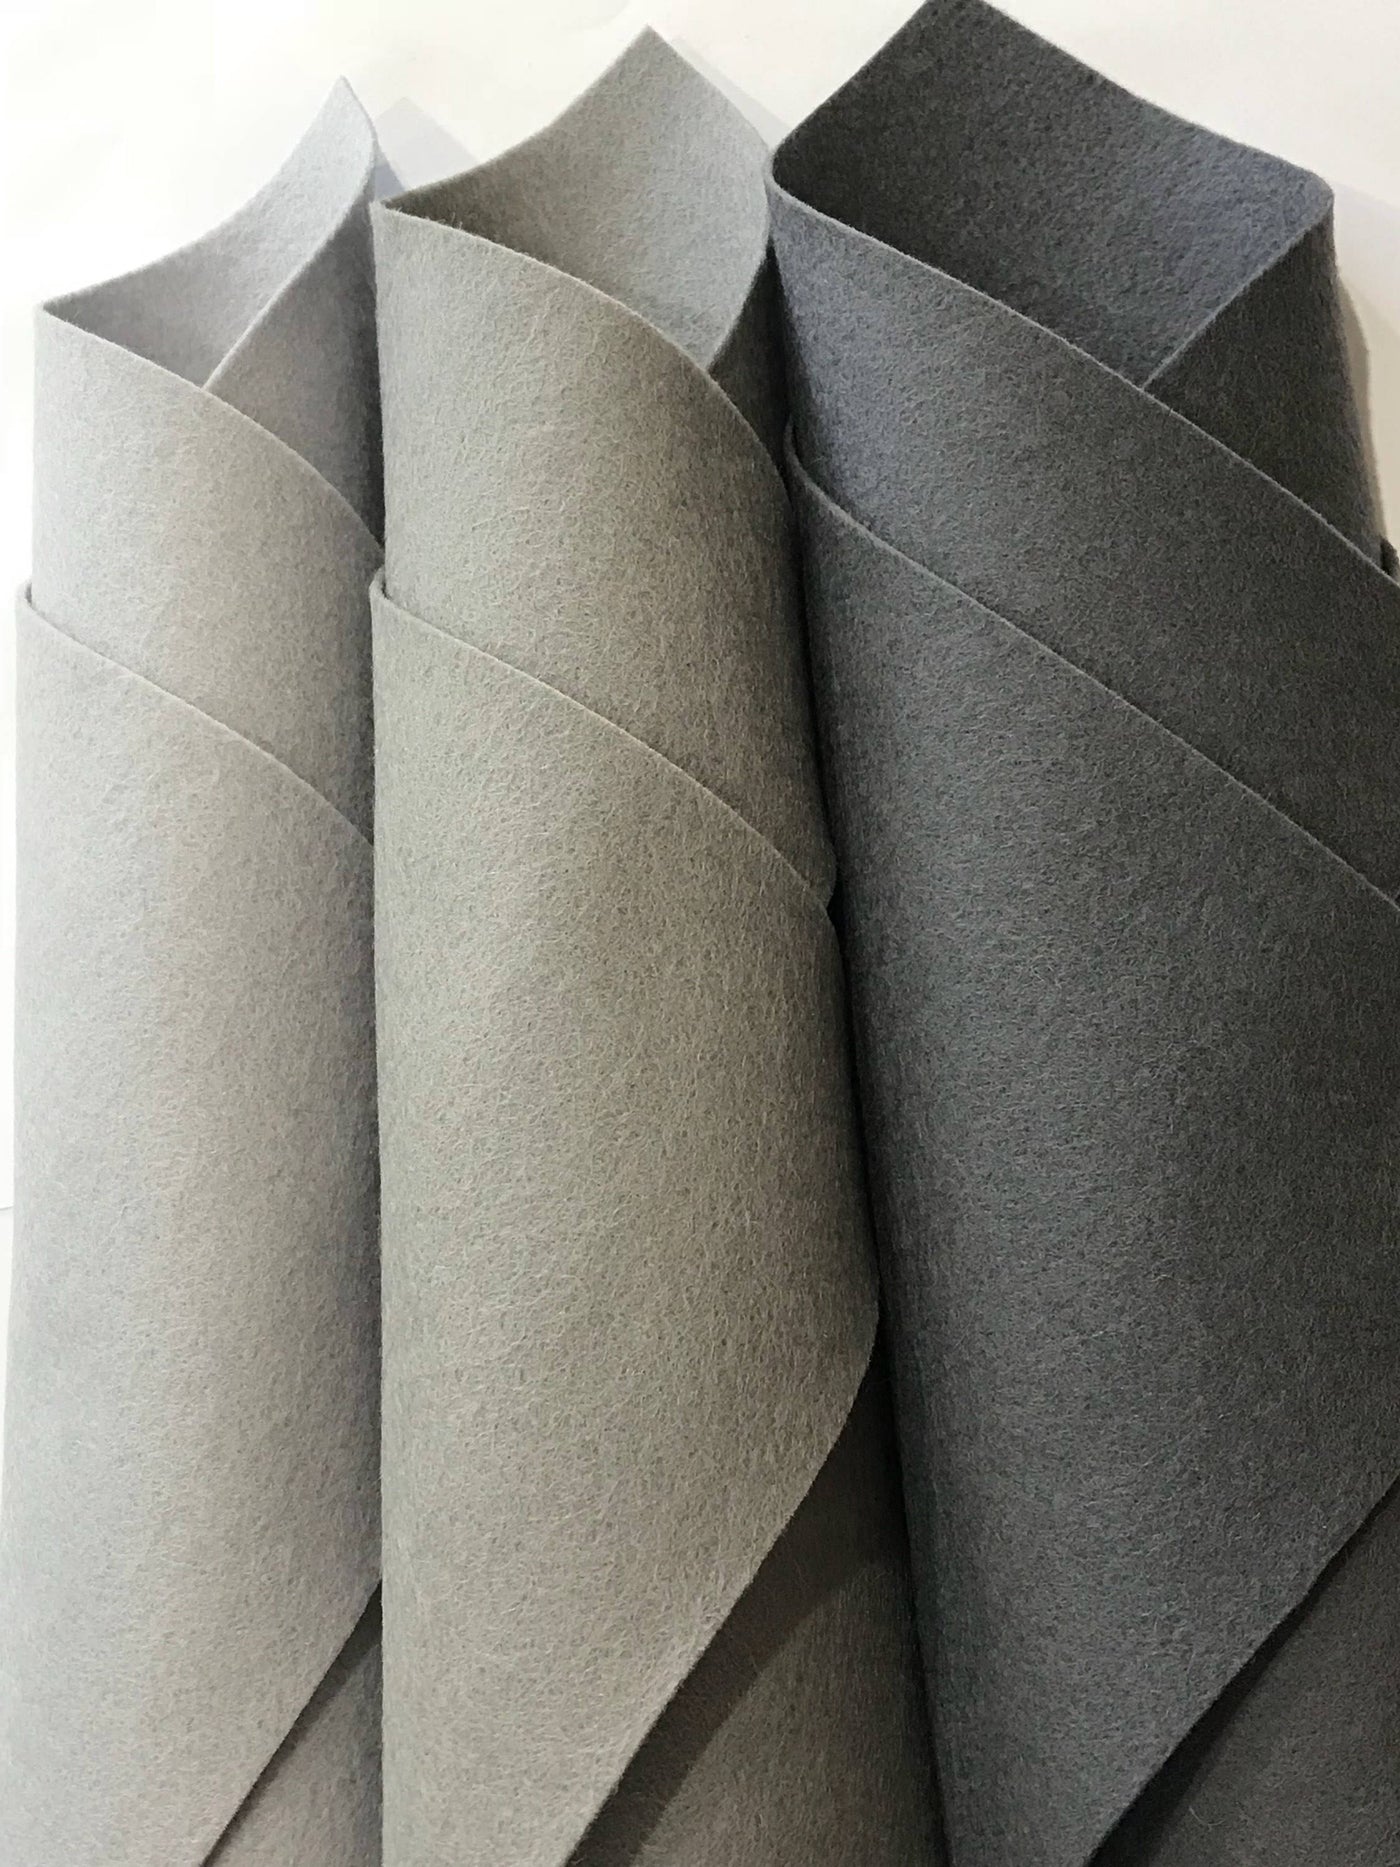 1mm Light Grey Merino Wool Felt No. 37 - Available in a range of 7 sizes